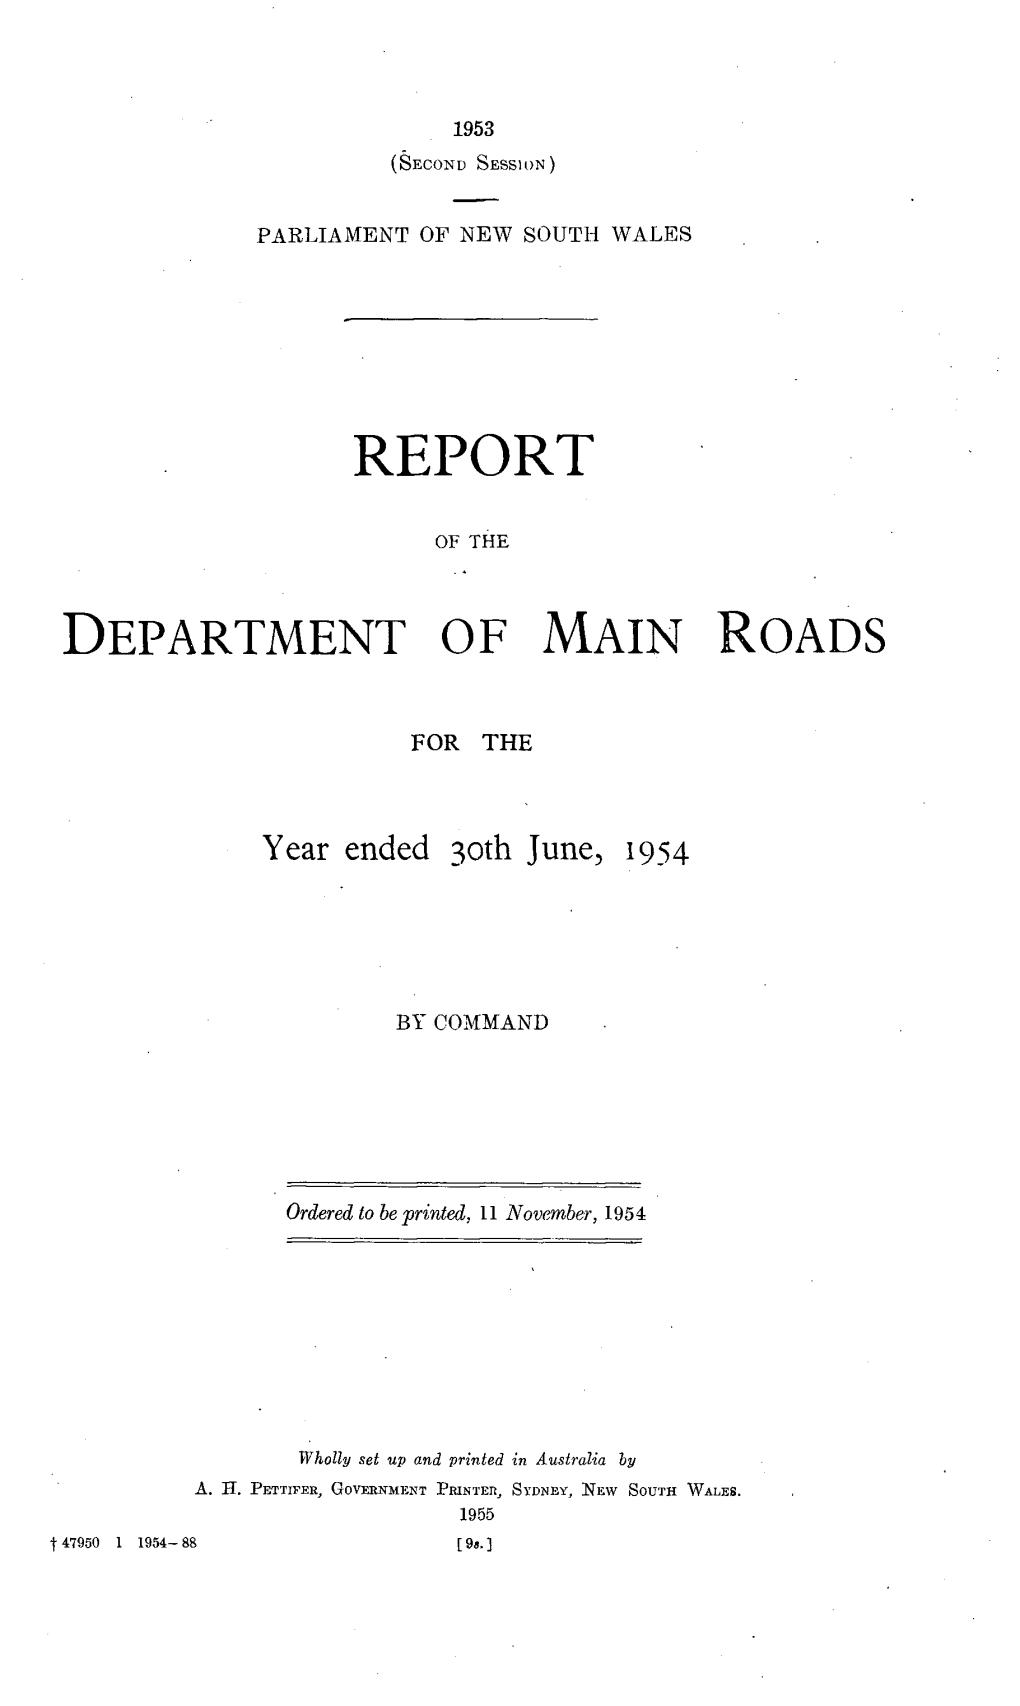 Department of Main Roads New South Wales, 1953-54